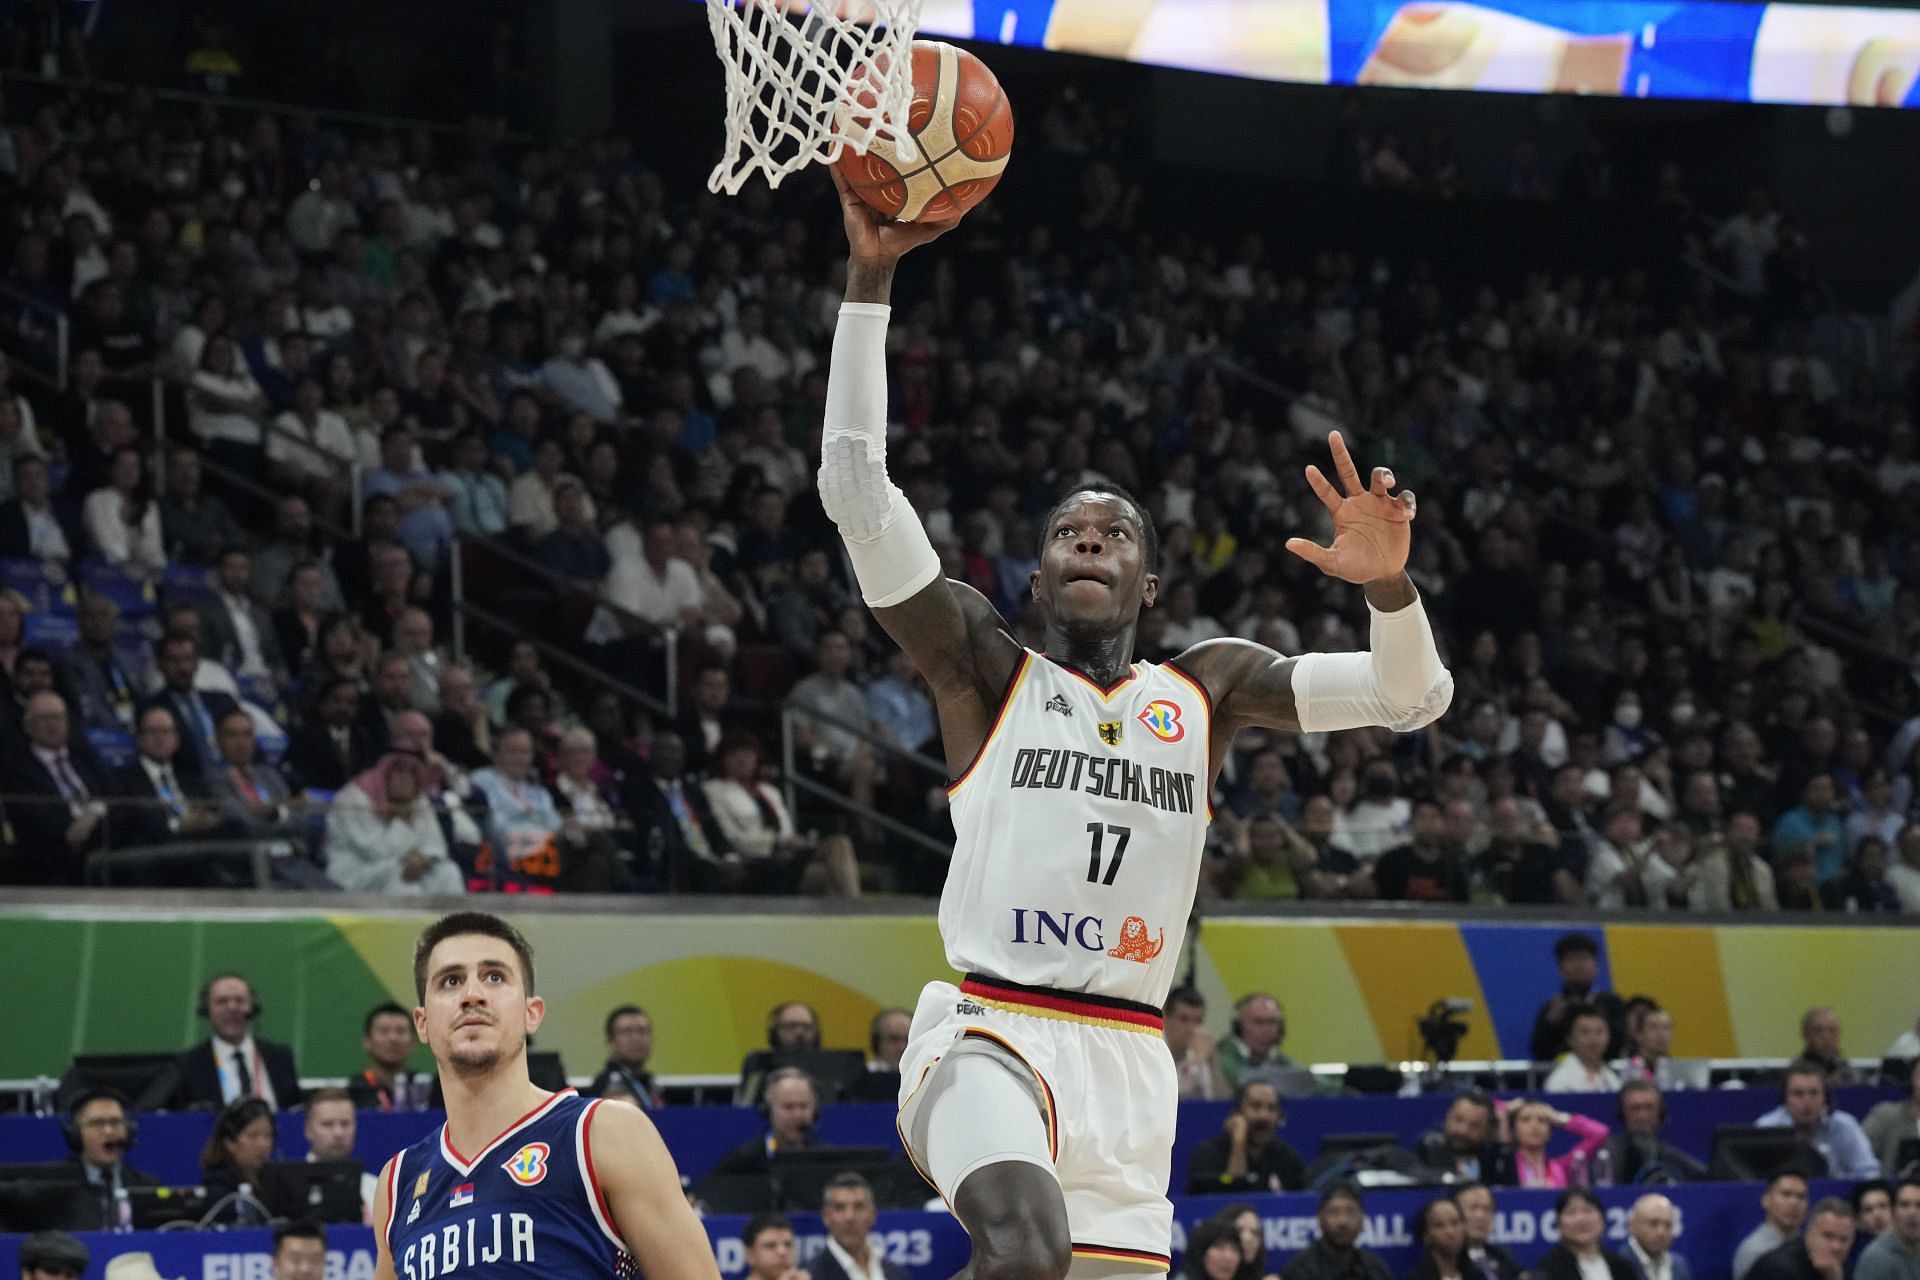 Germany head coach tries to grab Raptors' Dennis Schroder in heated  altercation at FIBA World Cup